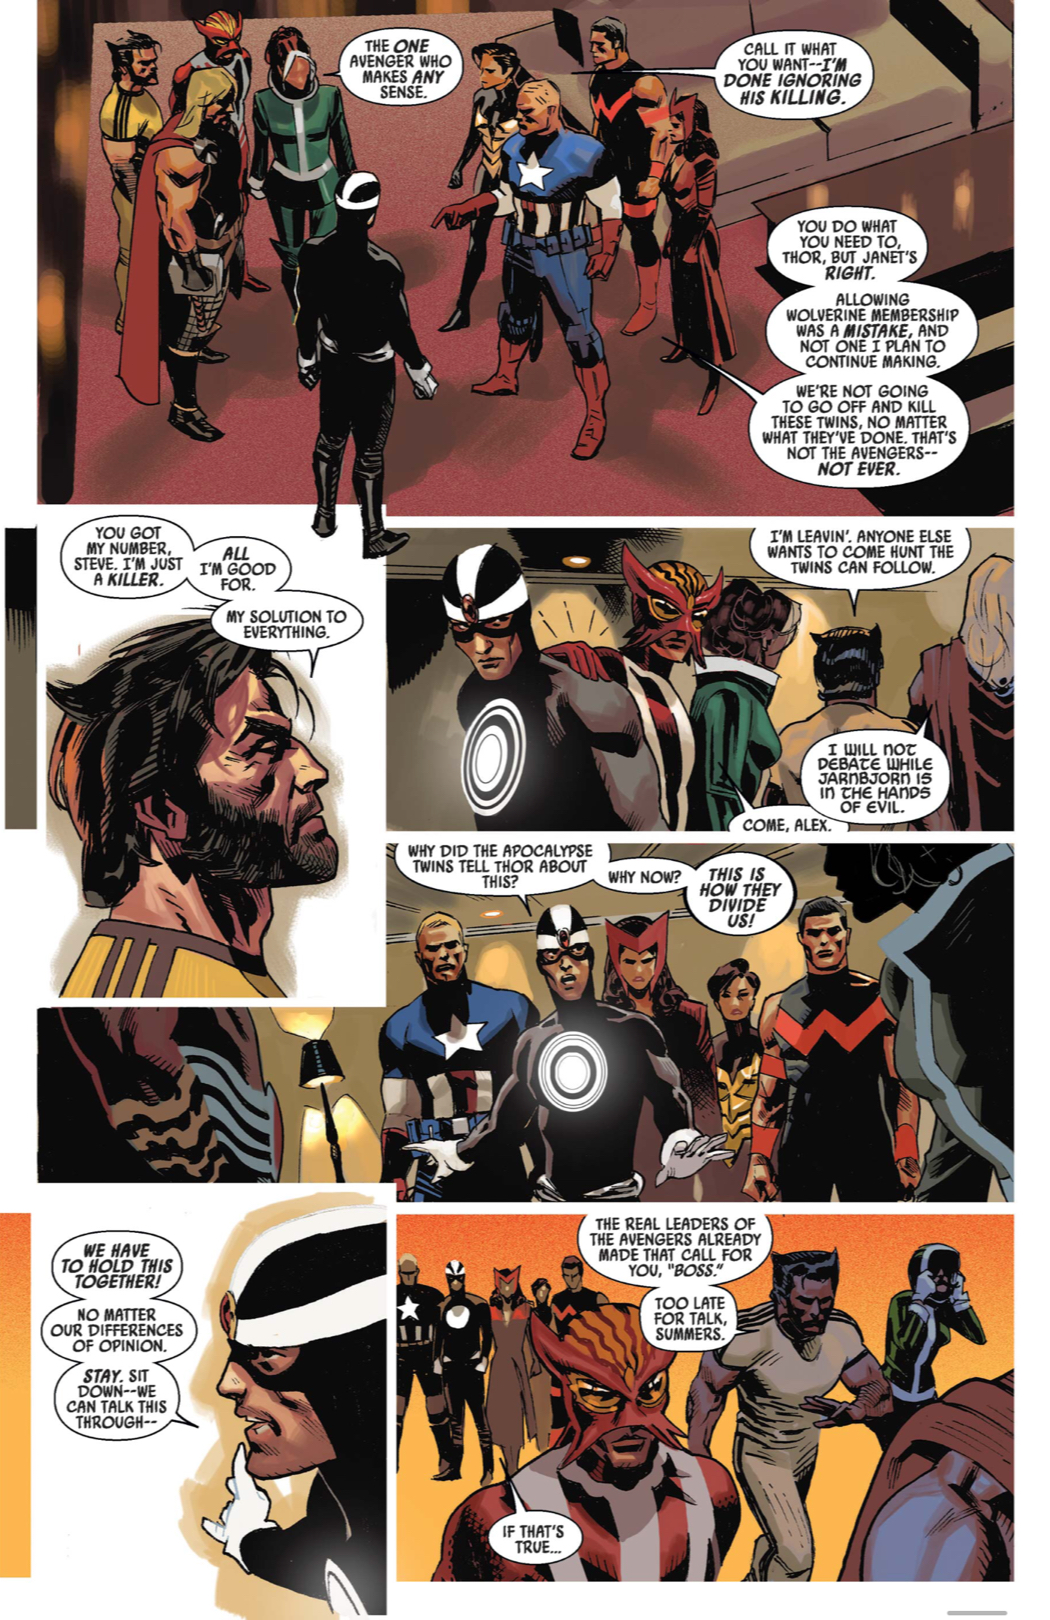 Remender's Uncanny Avengers relaunch puts Quicksilver and Scarlet Witch  into focus